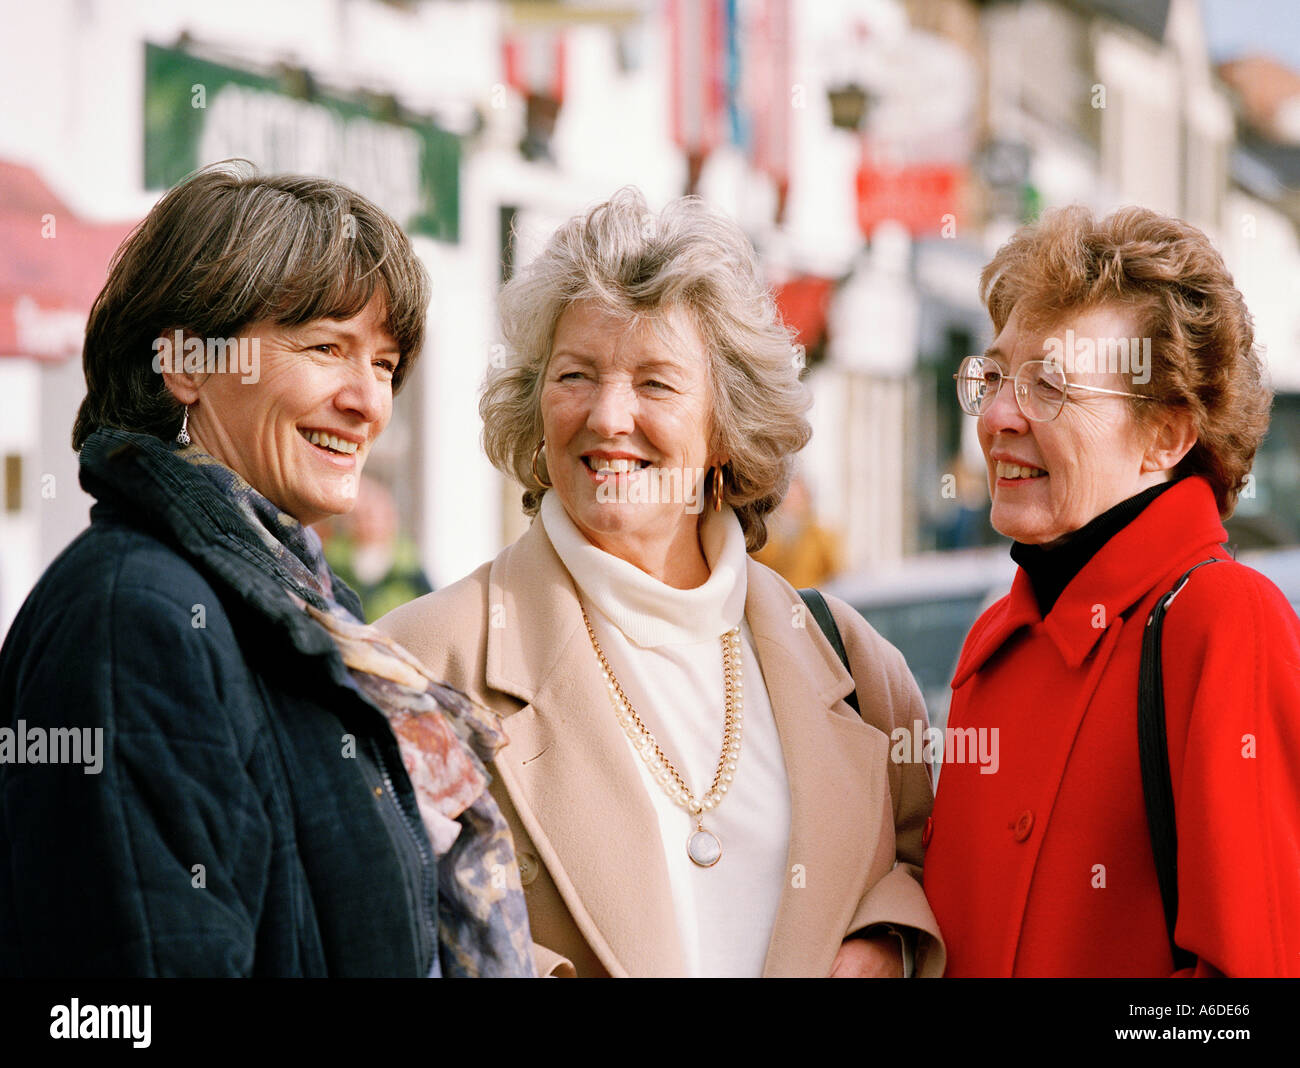 THREE MIDDLE AGED WOMEN CHATTING IN STREET Stock Photo